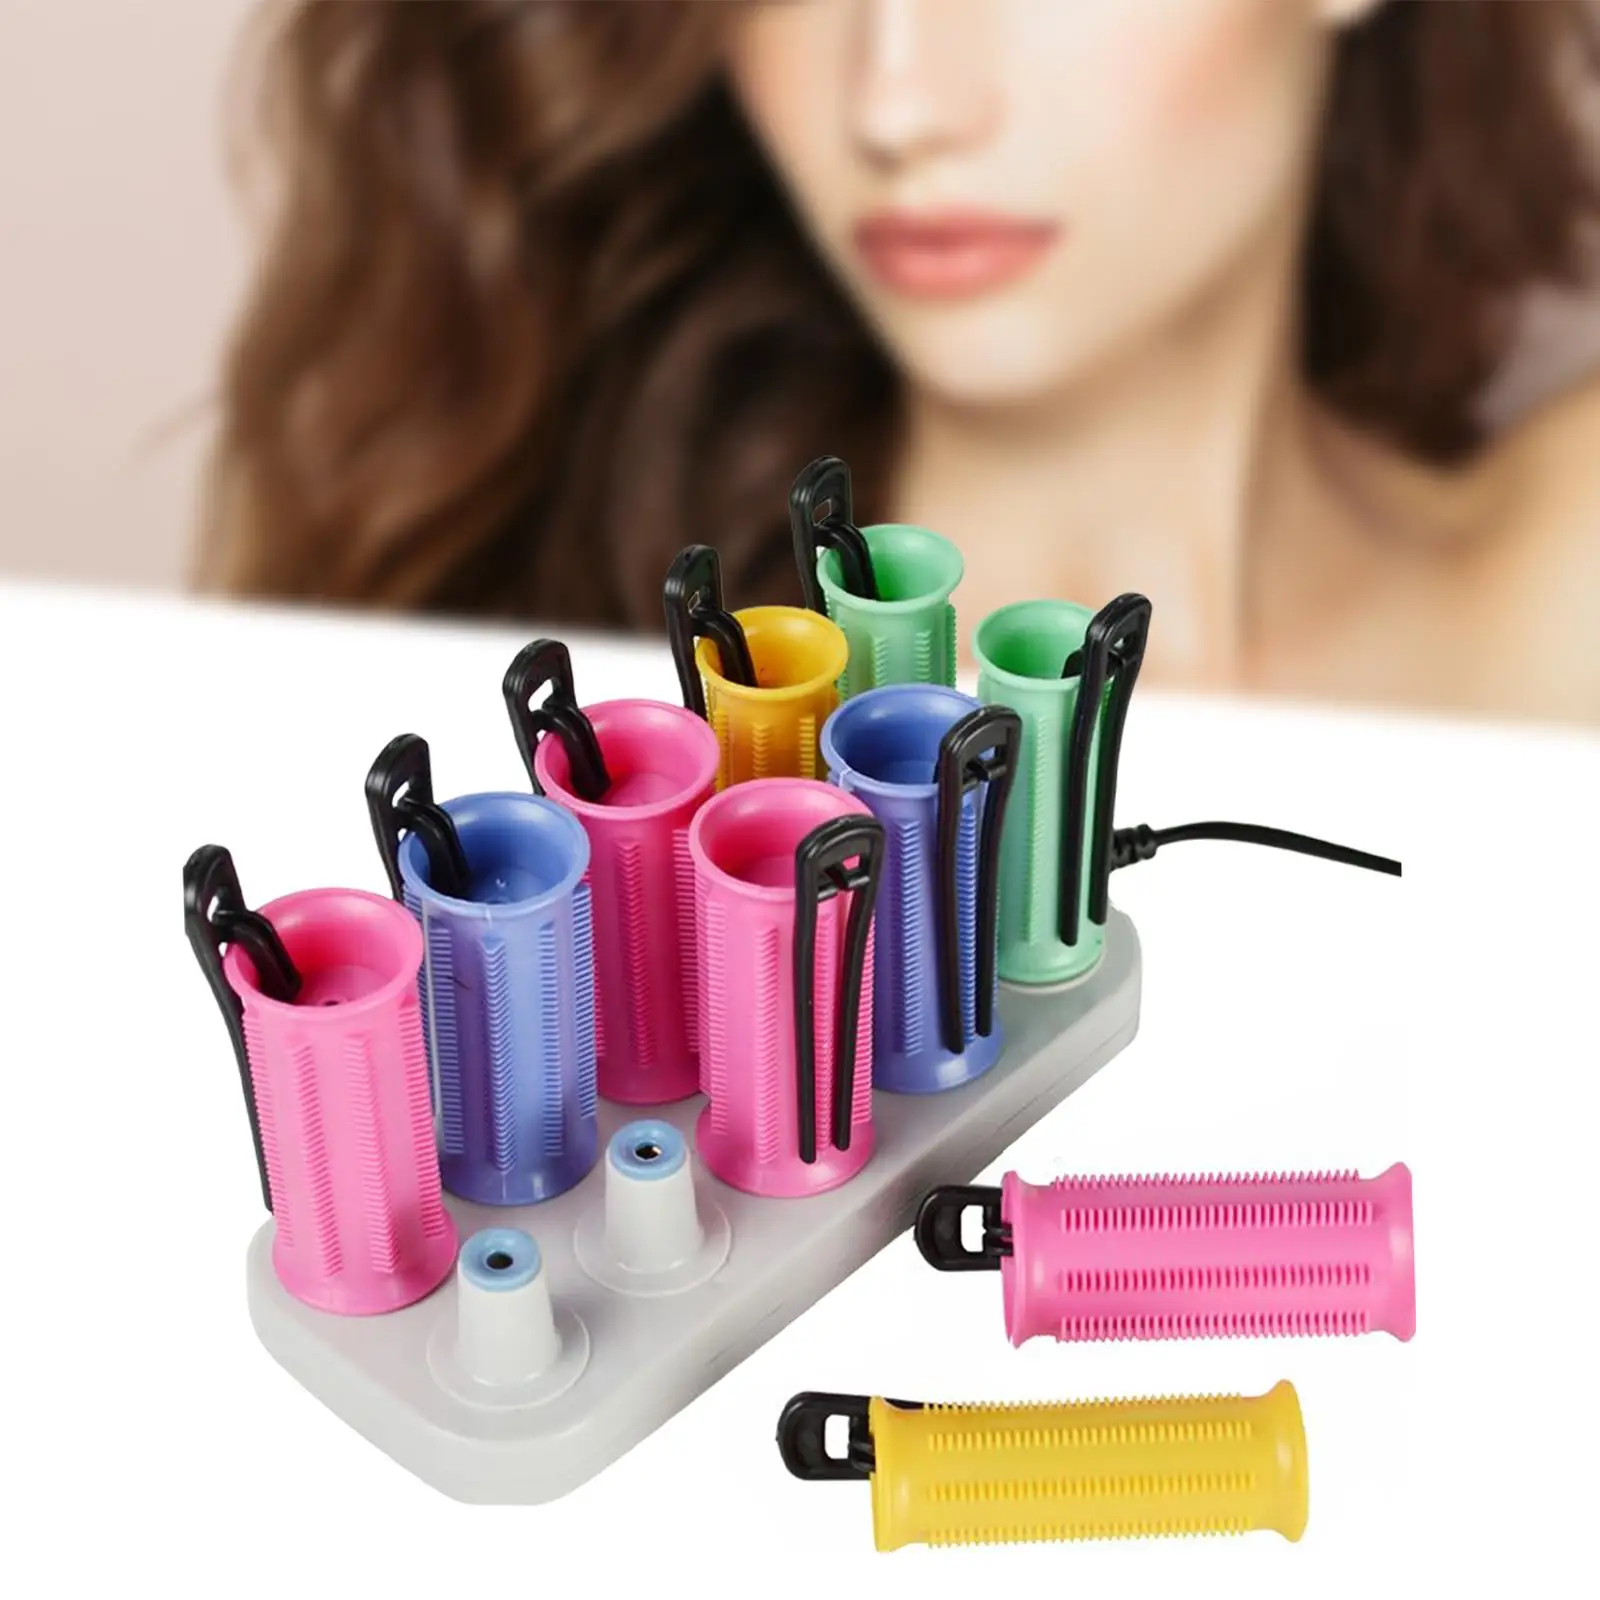 10Pcs Electric Heated Hair Rollers with 10x Hairpins Heat Rollers Women Curler Set Heat Roller Hair Perm Roller DIY Hairstyles